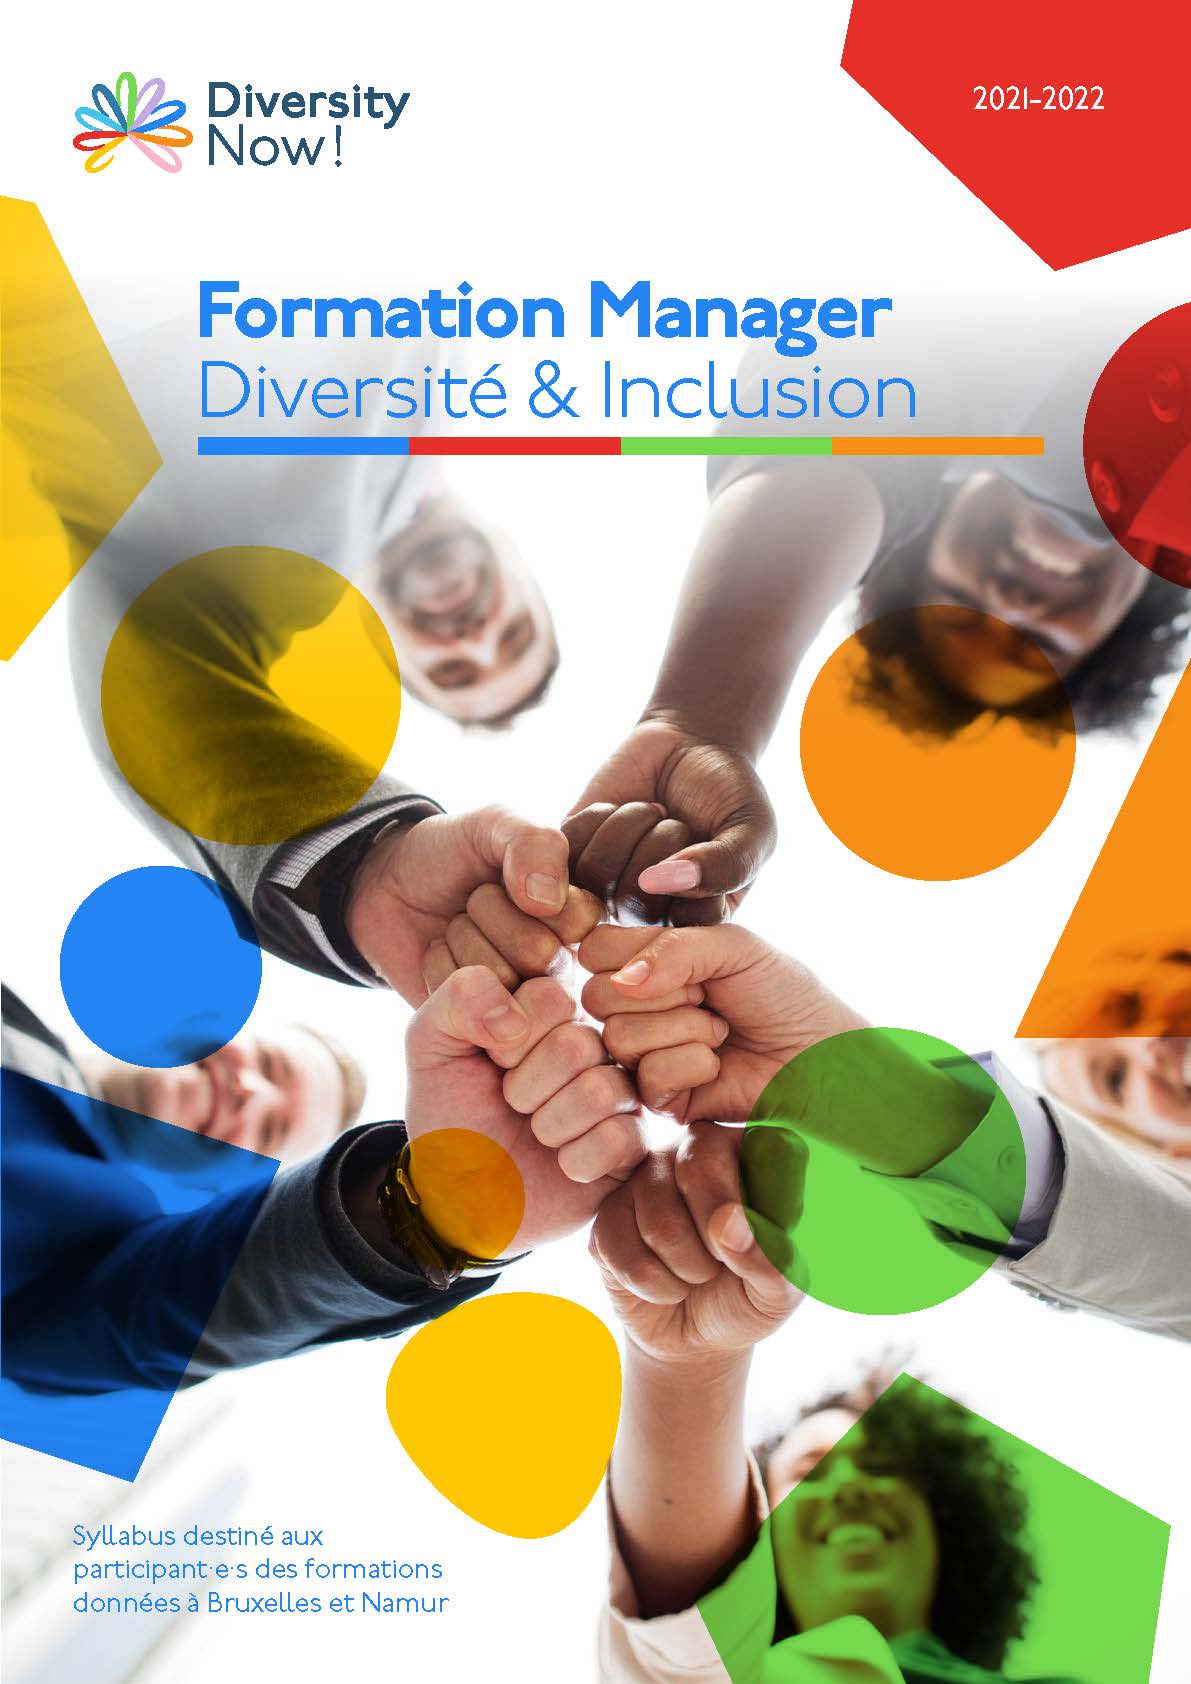 Syllabus formation manager DI - Diversity Now